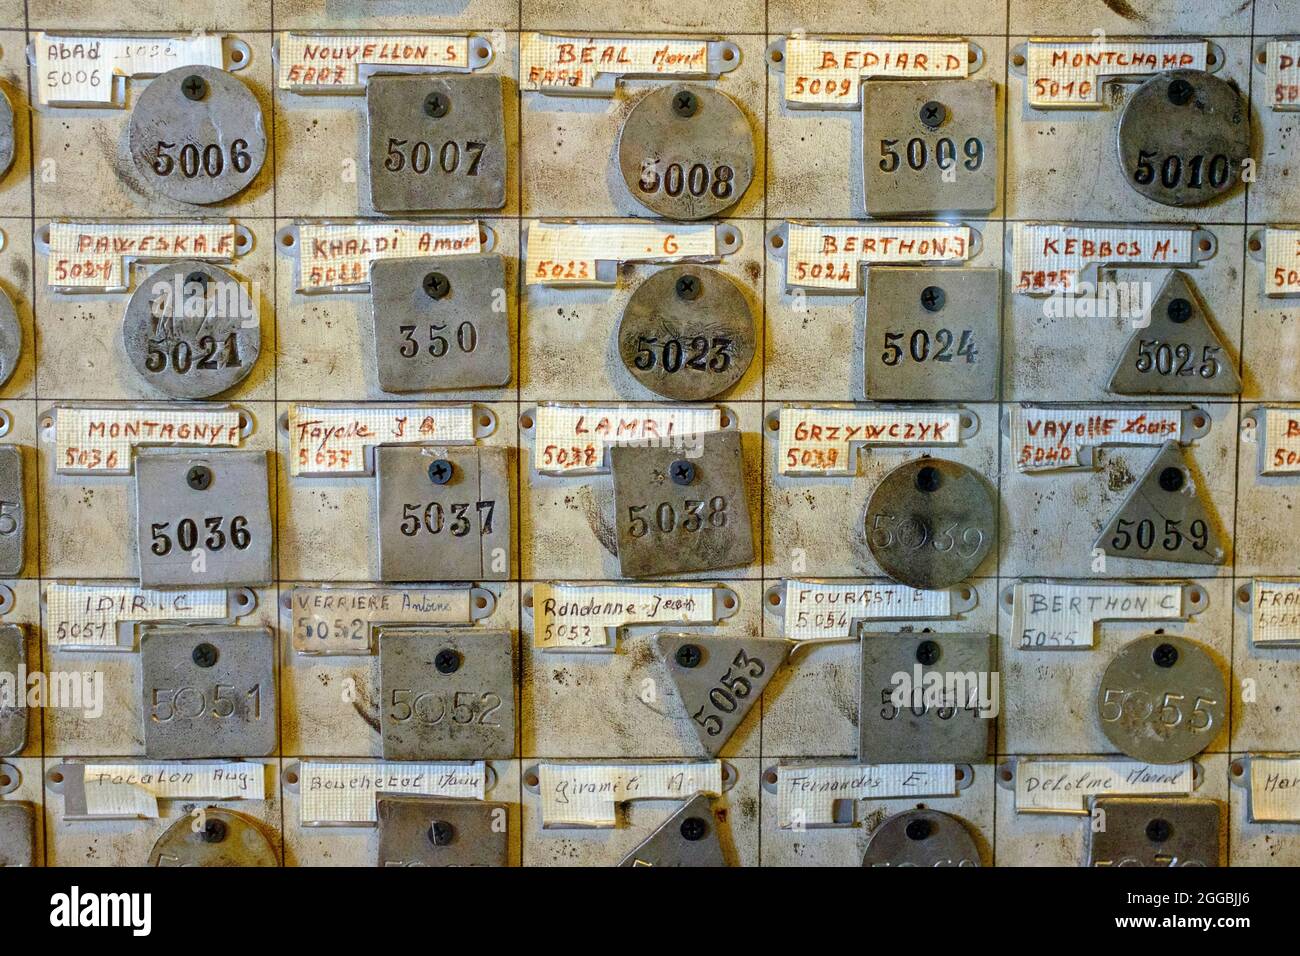 Miner's ID tags in la lampisterie (lamp room) at Saint-Etienne Mine Museum, France Stock Photo